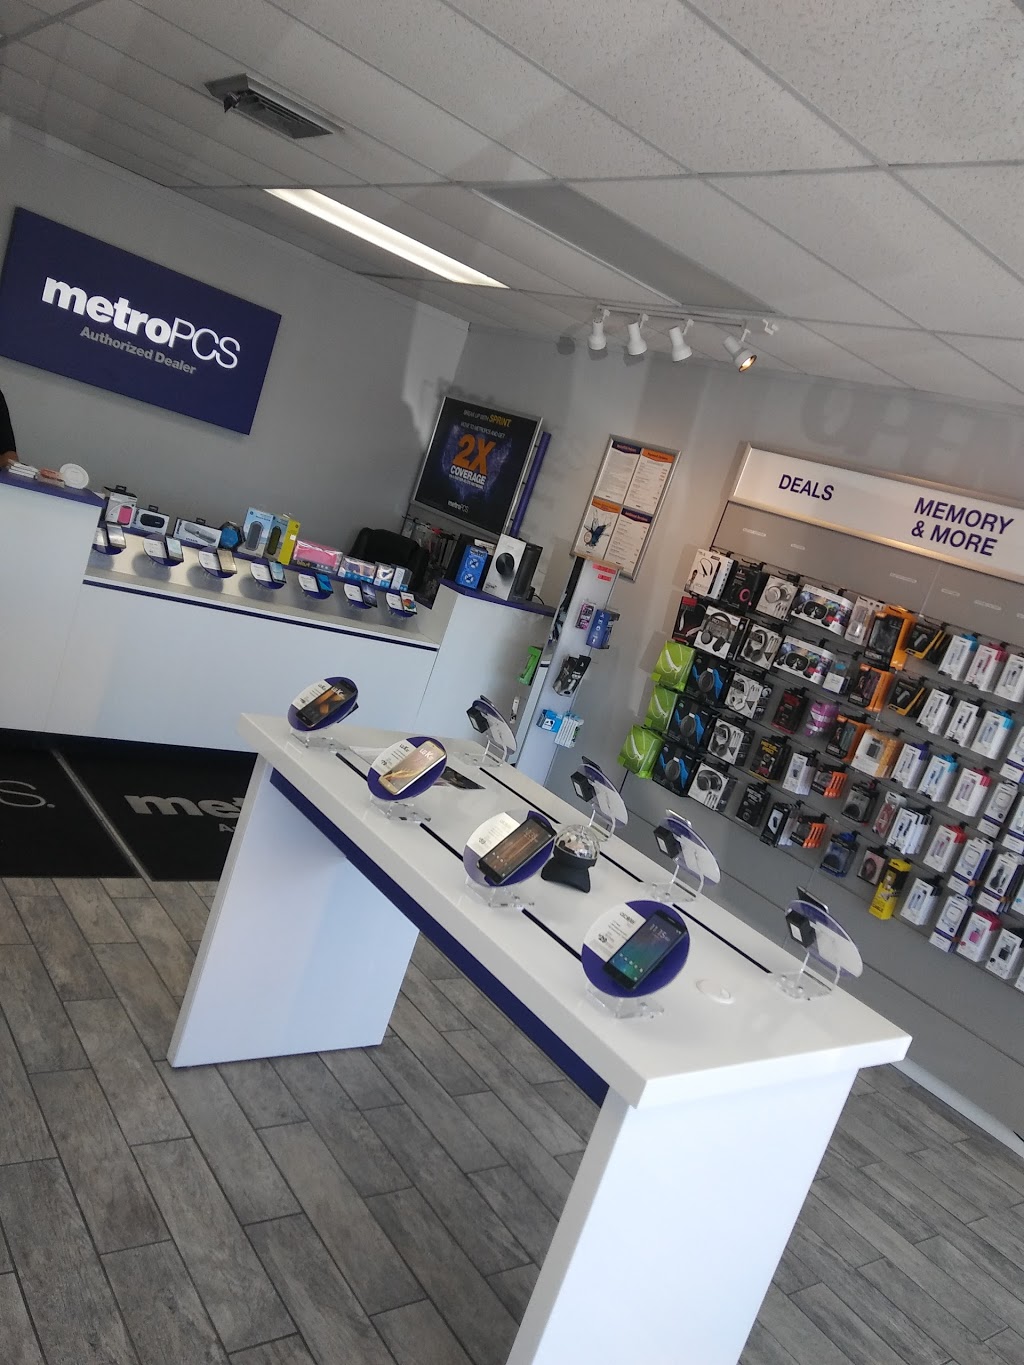 Metro by T-Mobile | 25434 Ford Rd, Dearborn Heights, MI 48127, USA | Phone: (313) 429-9250